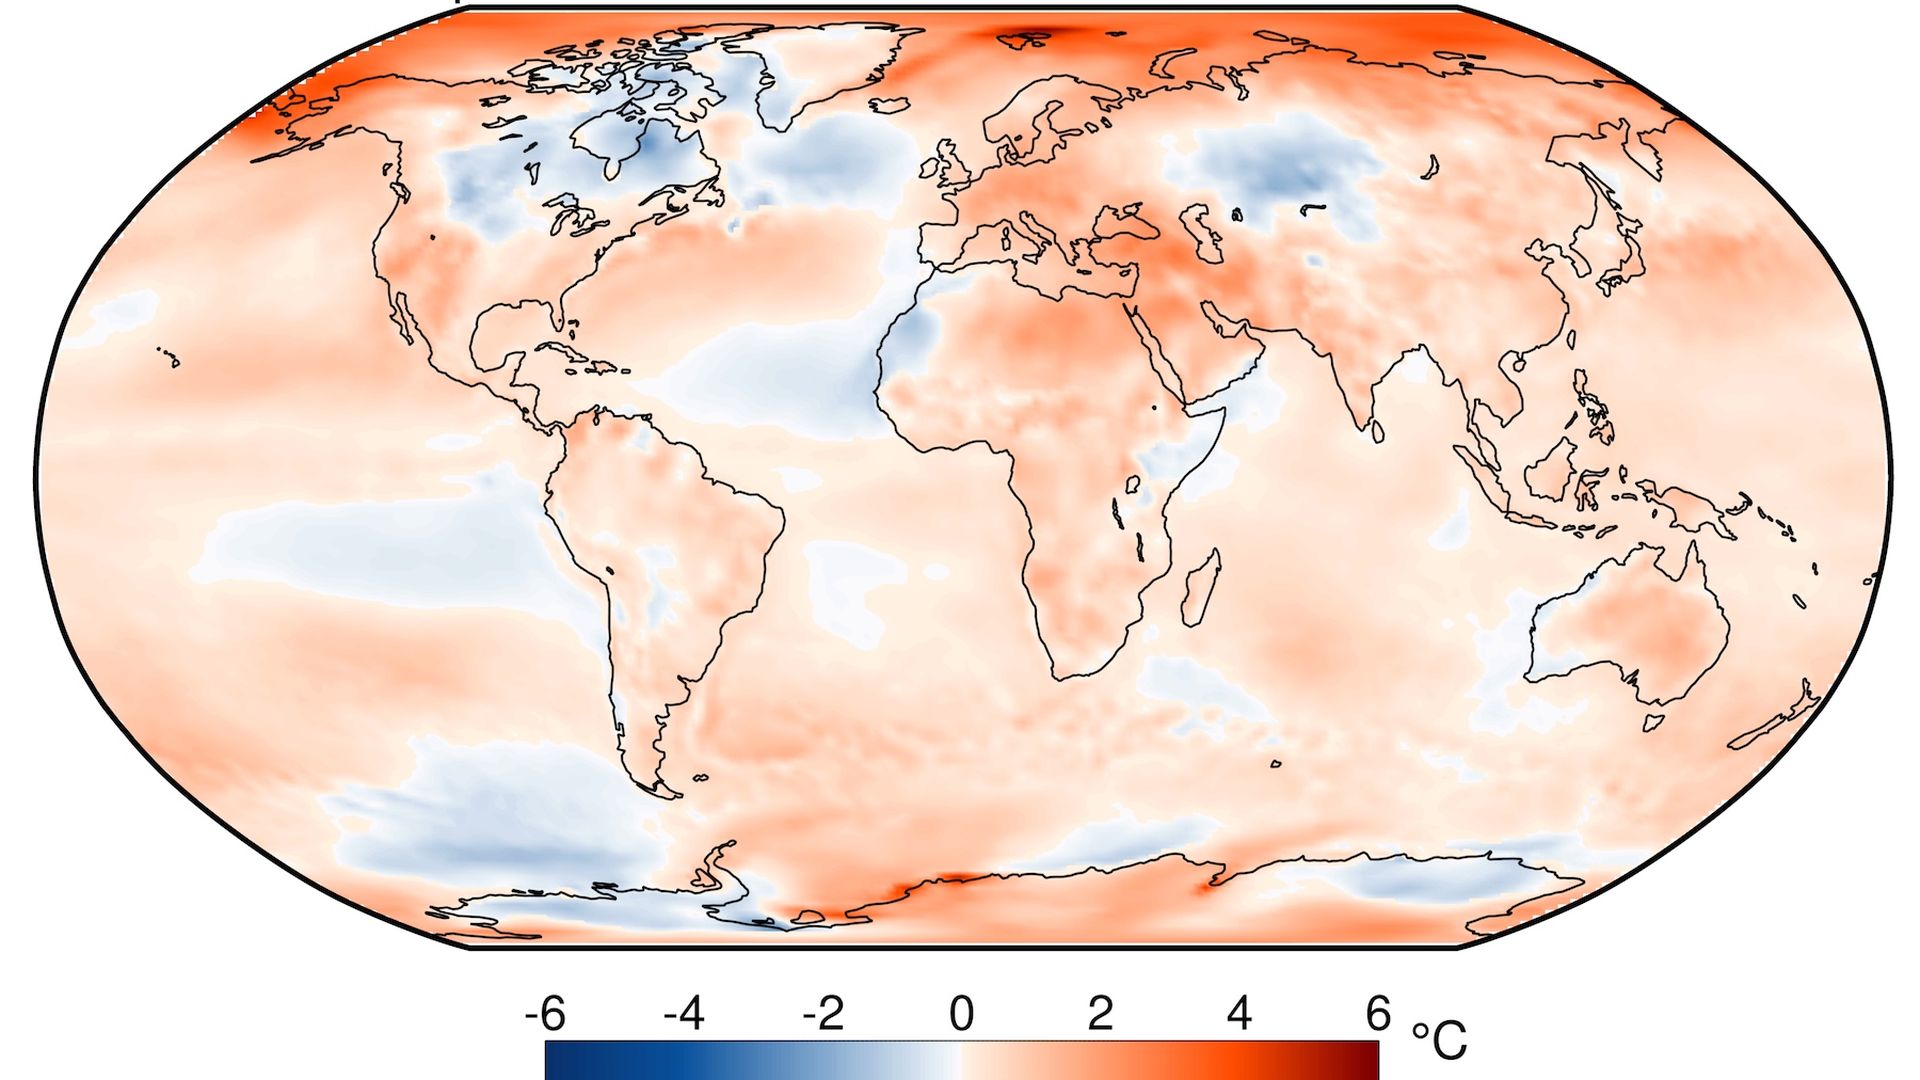 2018 was the fourth-warmest year on record, with unusual warmth blanketing the Arctic, Europe, and much of the rest of the globe.